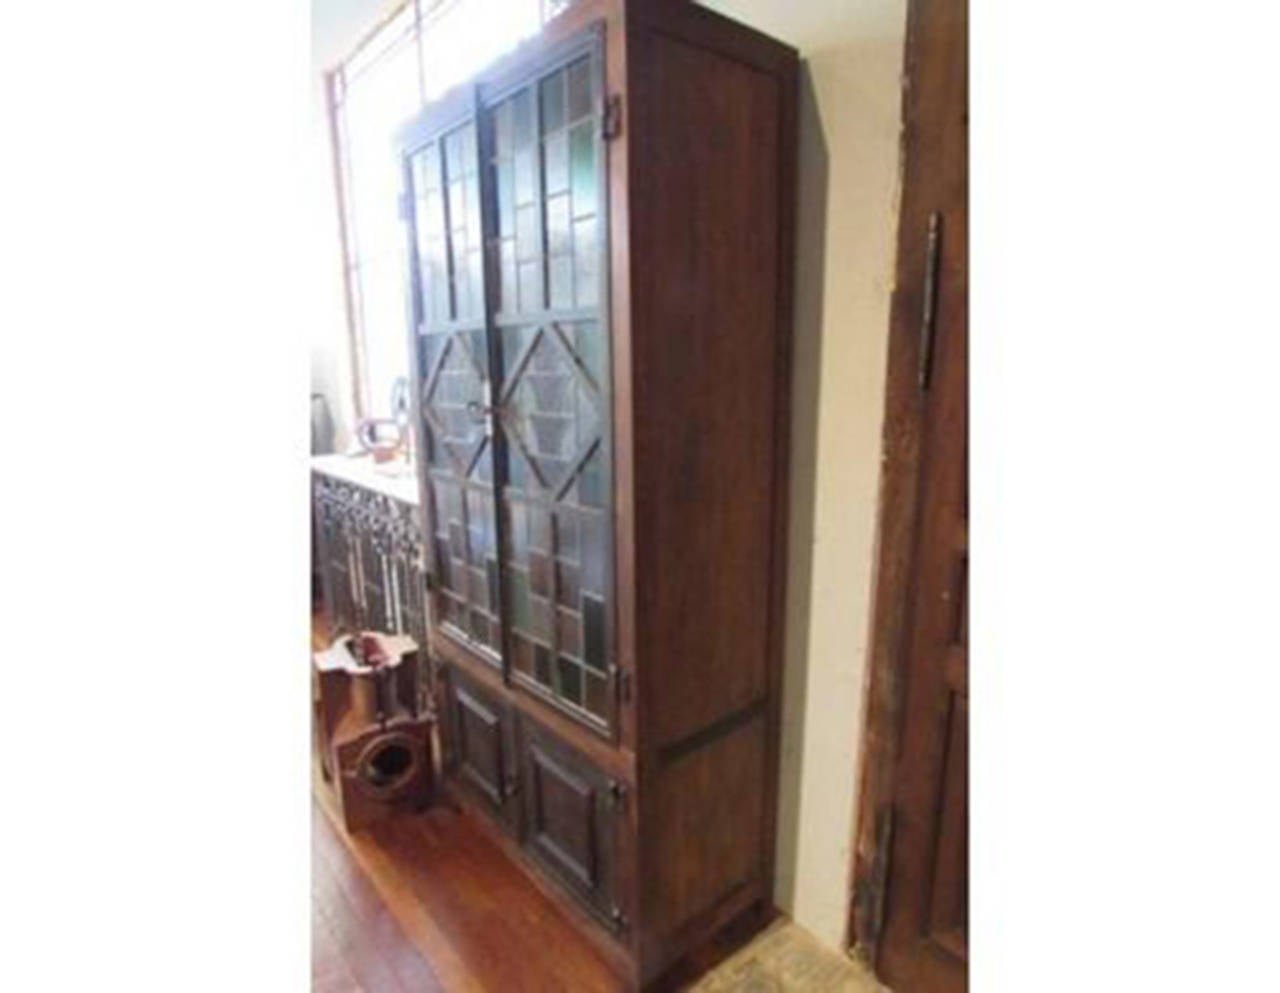 Antique retro style wooden wardrobe with stained glass doors at the top. 
Three shelves.
Two wrought iron door at the bottom.